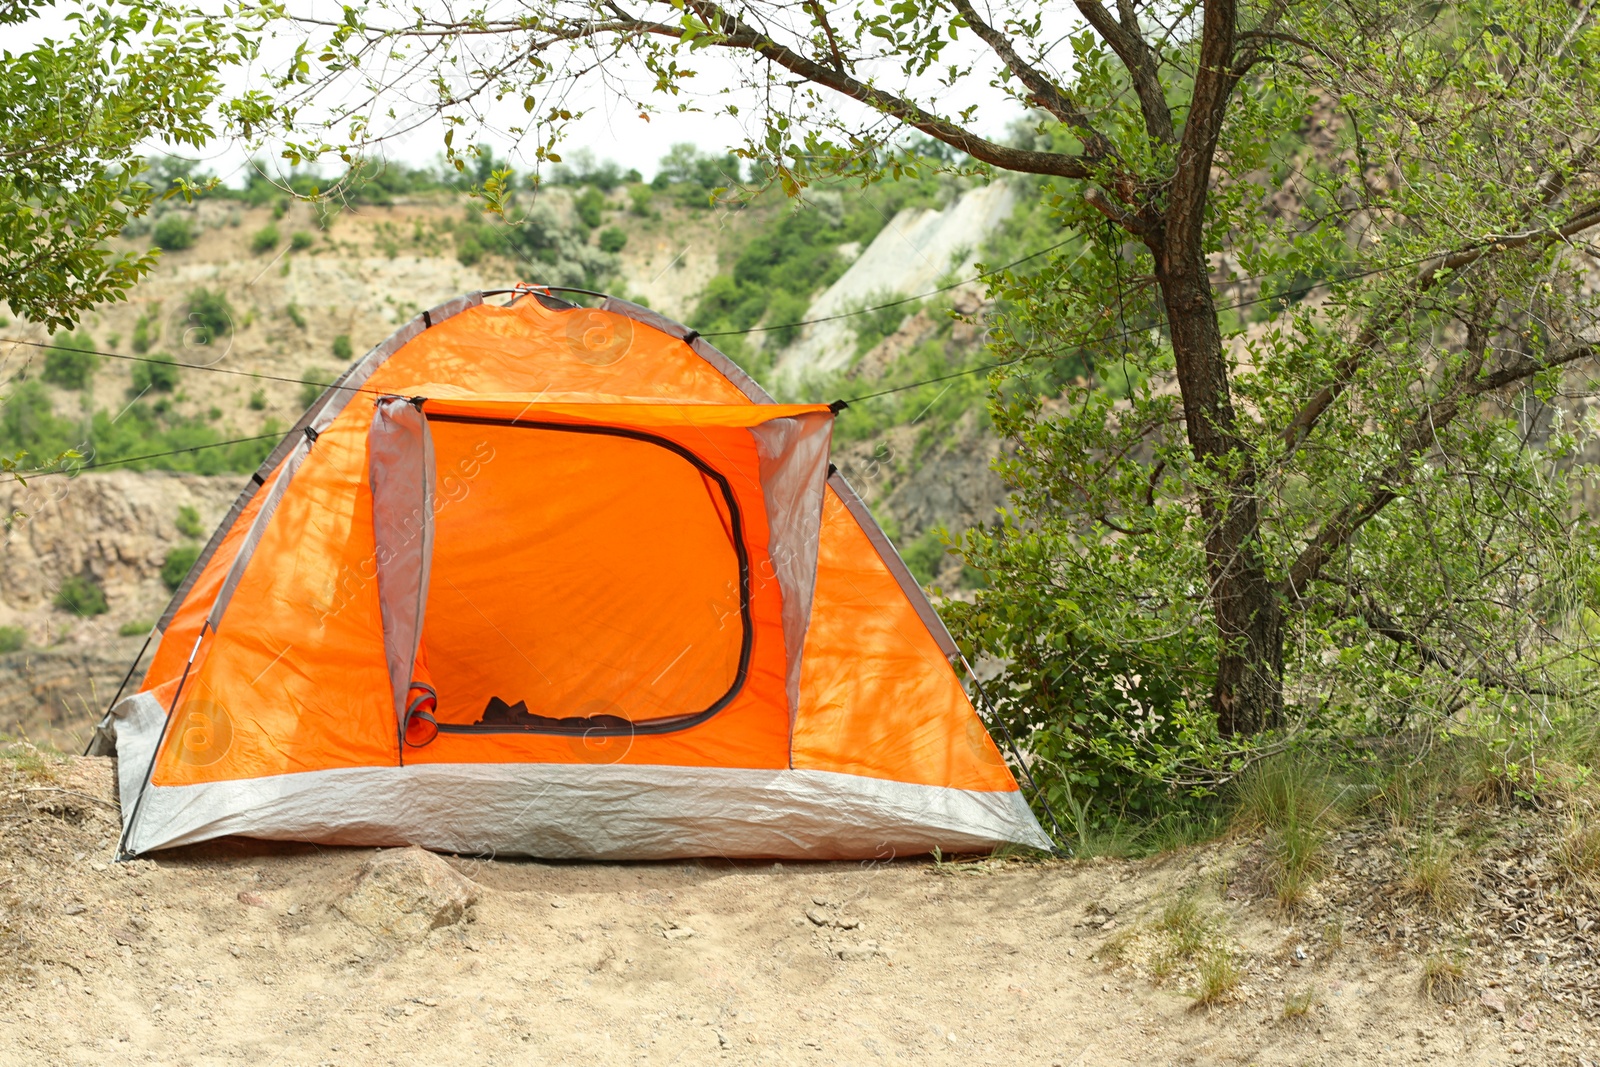 Photo of Orange camping tent near tree in wilderness